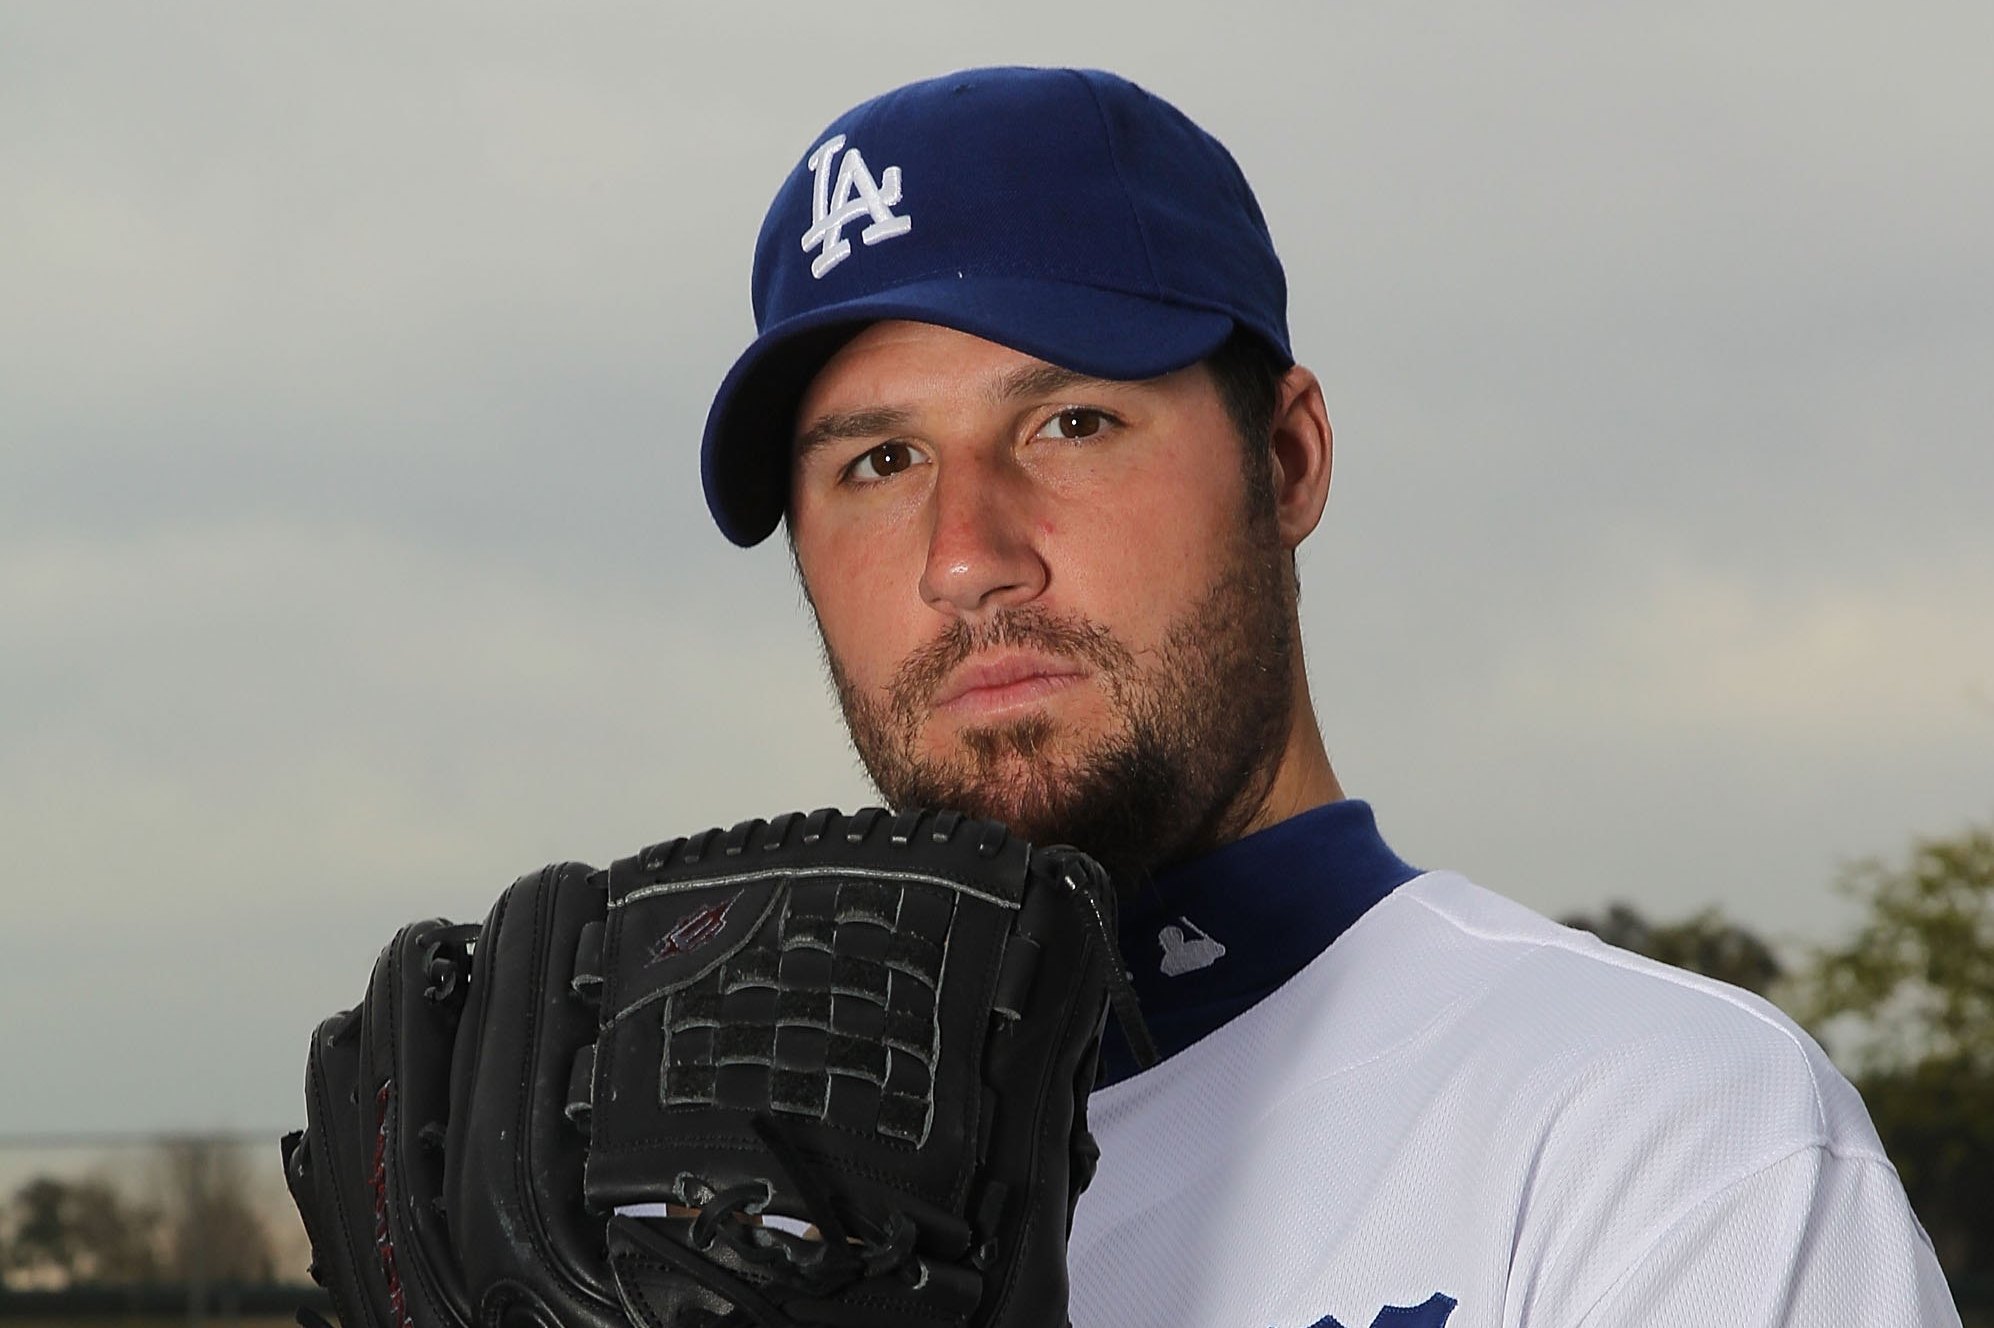 Canada's Gagne admits HGH use with Dodgers